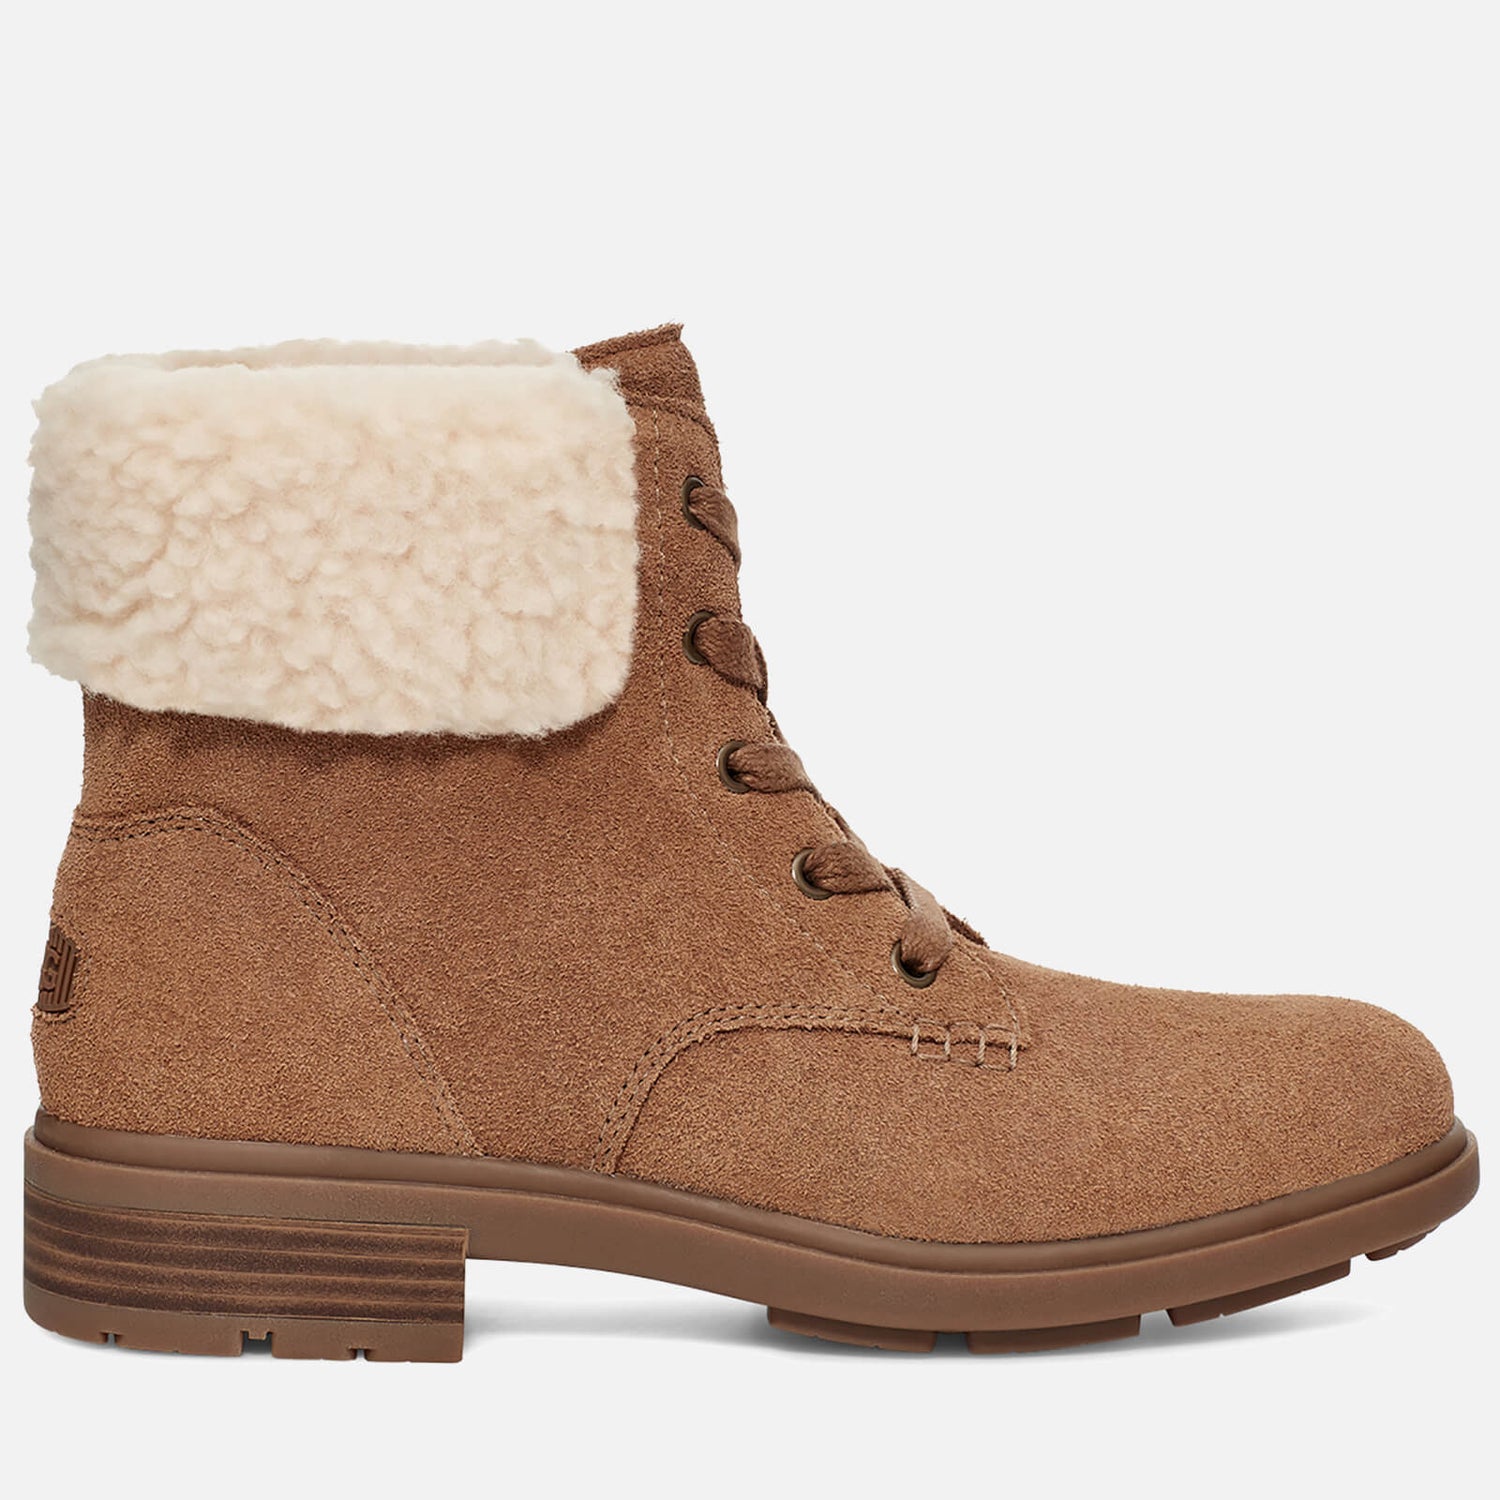 UGG Women's Harrison Lace Waterproof Suede Lace Up Boots - Chestnut - UK 4